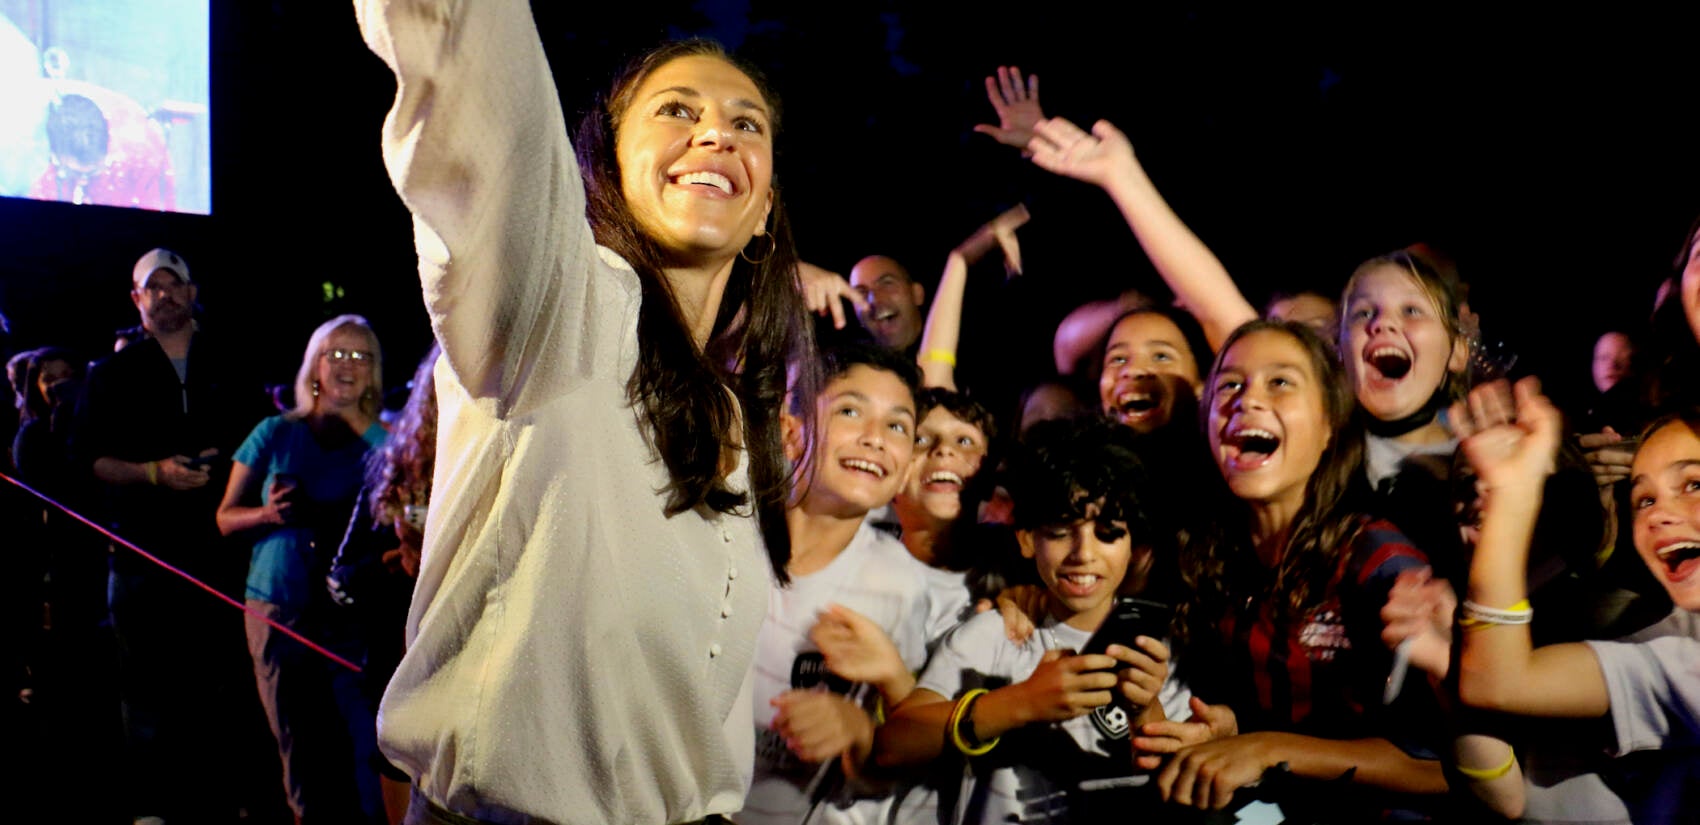 Carli Lloyd takes a selfie with some young soccer fans during a celebration of her storied soccer career in her hometown of Delran, N.J.